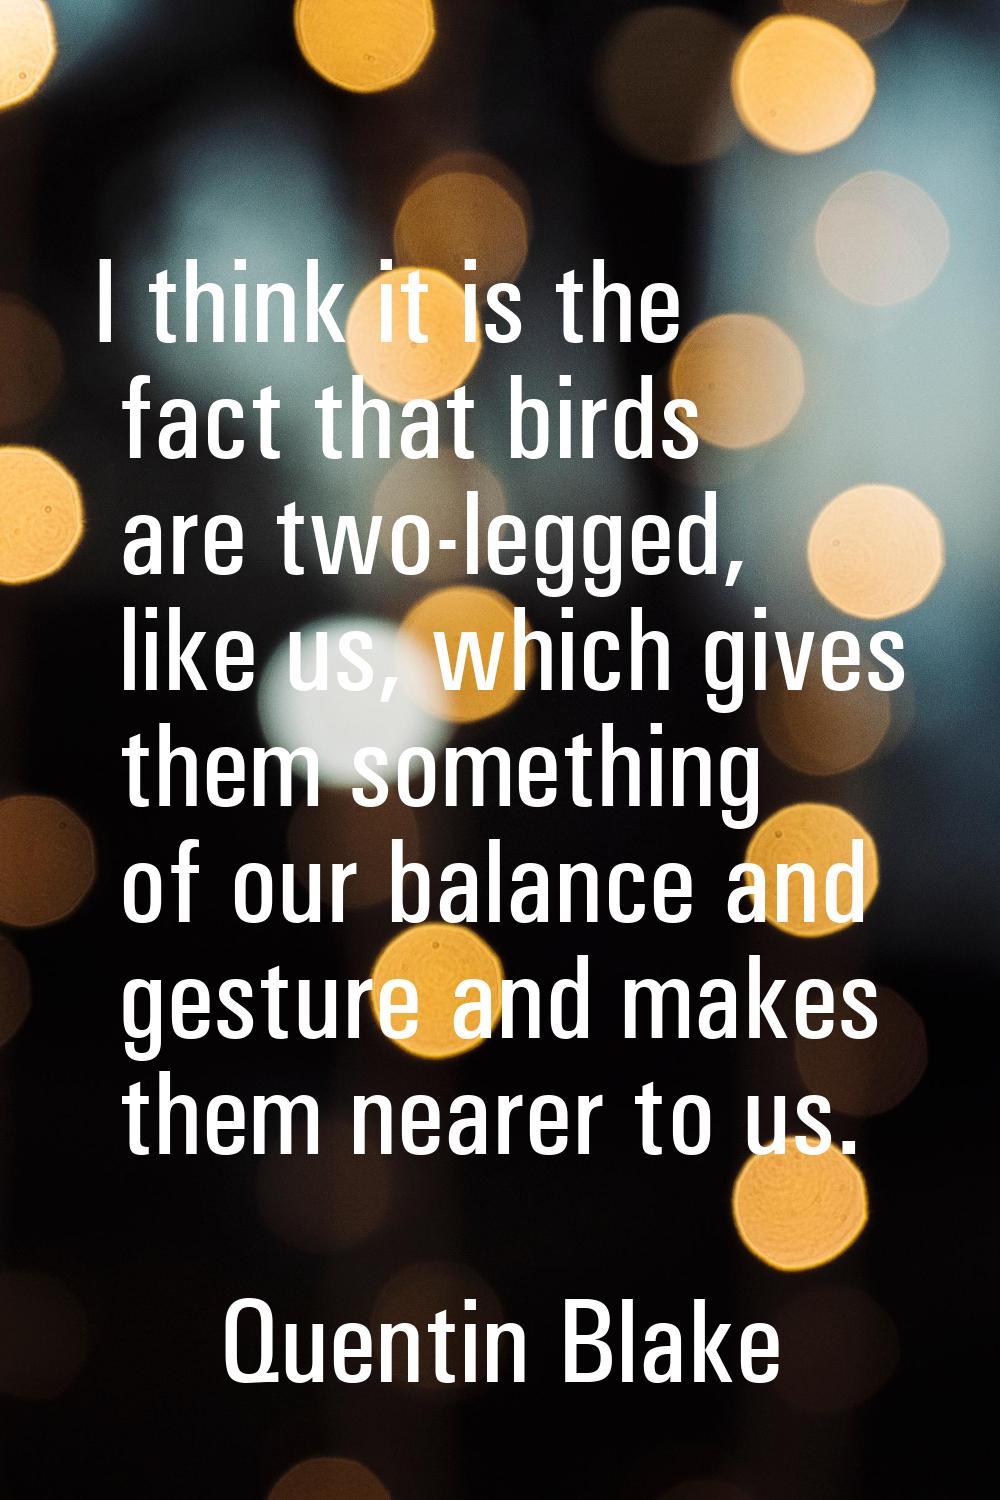 I think it is the fact that birds are two-legged, like us, which gives them something of our balanc